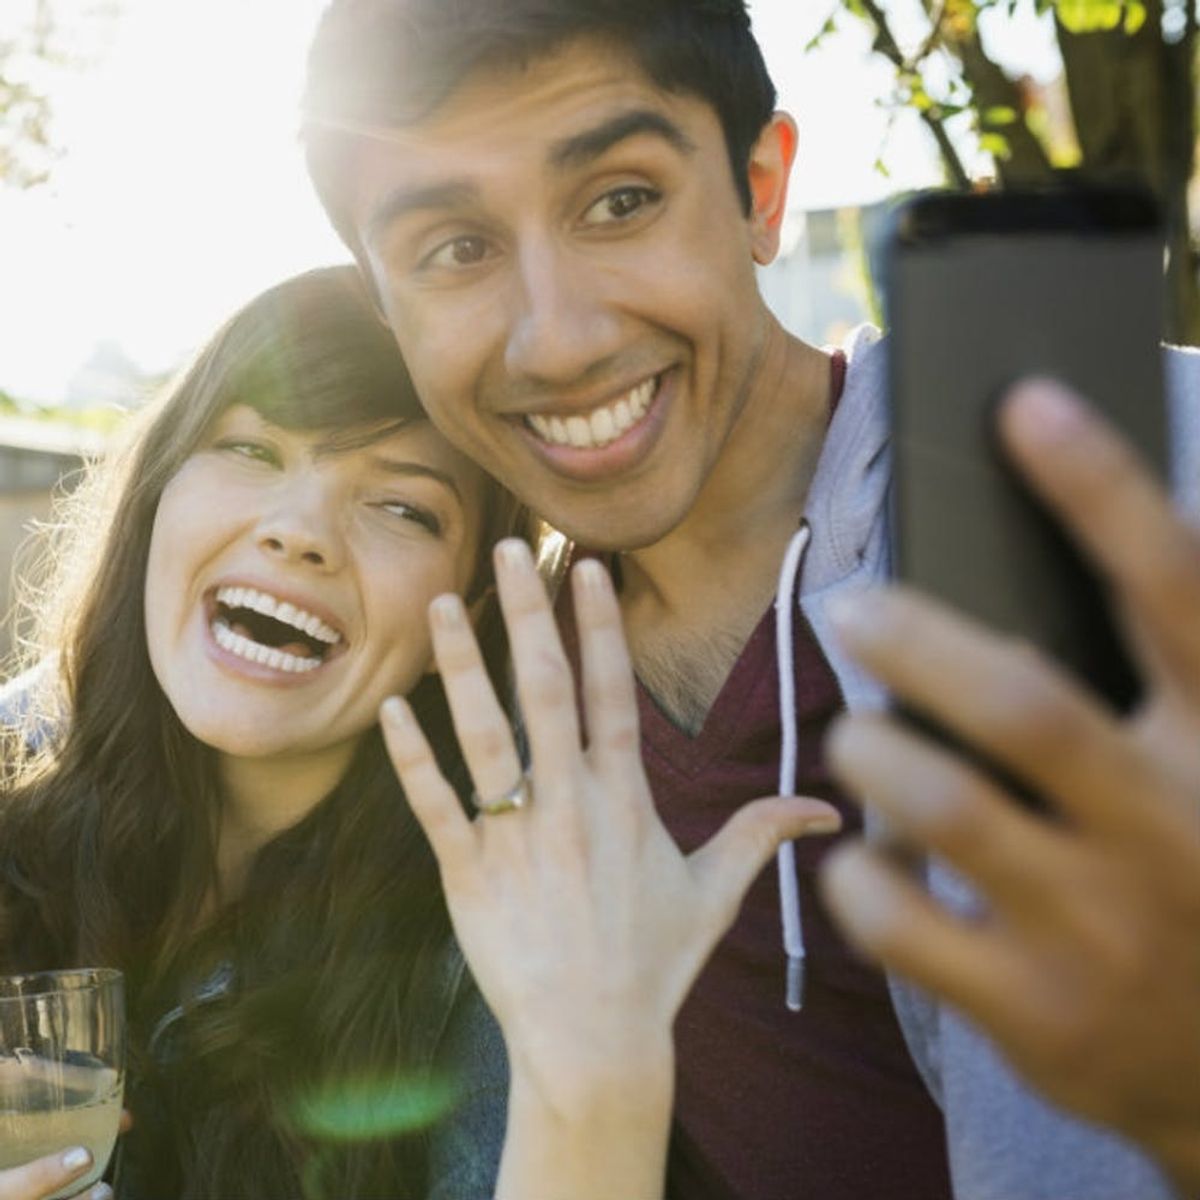 5 Tinder Success Stories That Will Restore Your Faith in Love